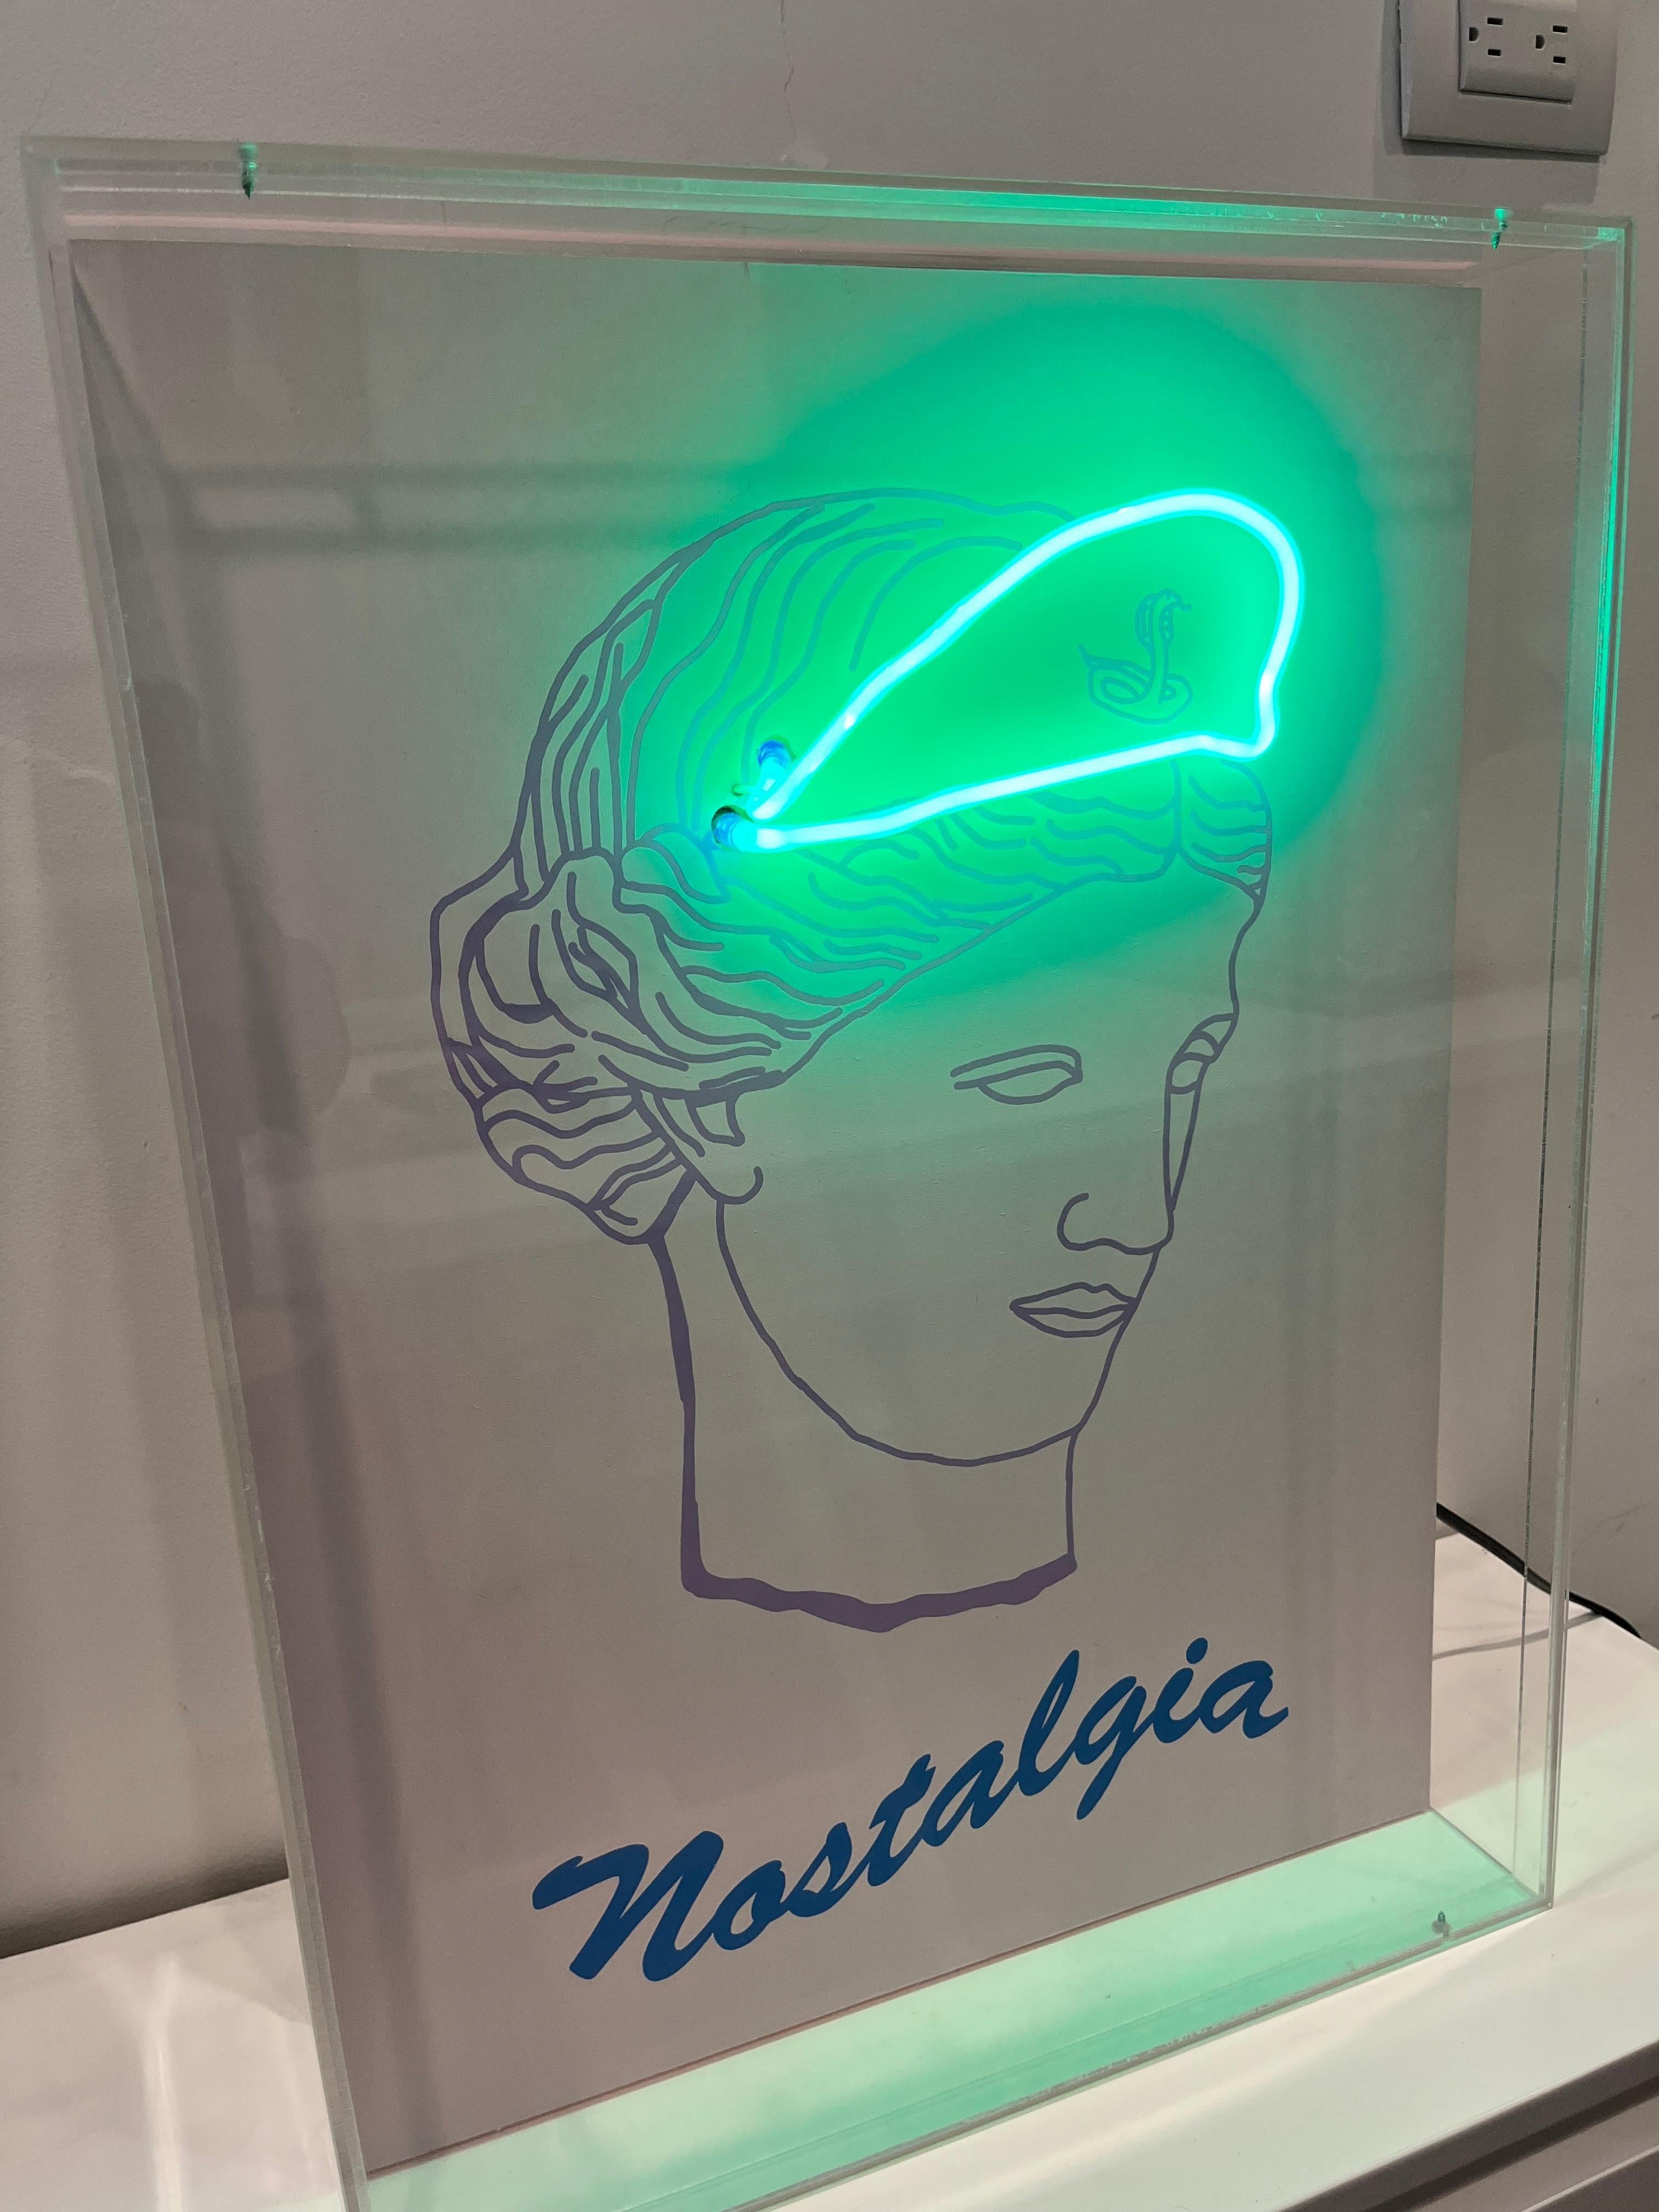 Nostalgia, 2019  Paloma Castello 
From the series Neon Classics
Screen printing with neon lights
Dimensions: 24 H in x 18.1 W x 5.9 D in. 
Edition 2/10

In her work She likes to bring life to objects or icons from the past, intervening in them a